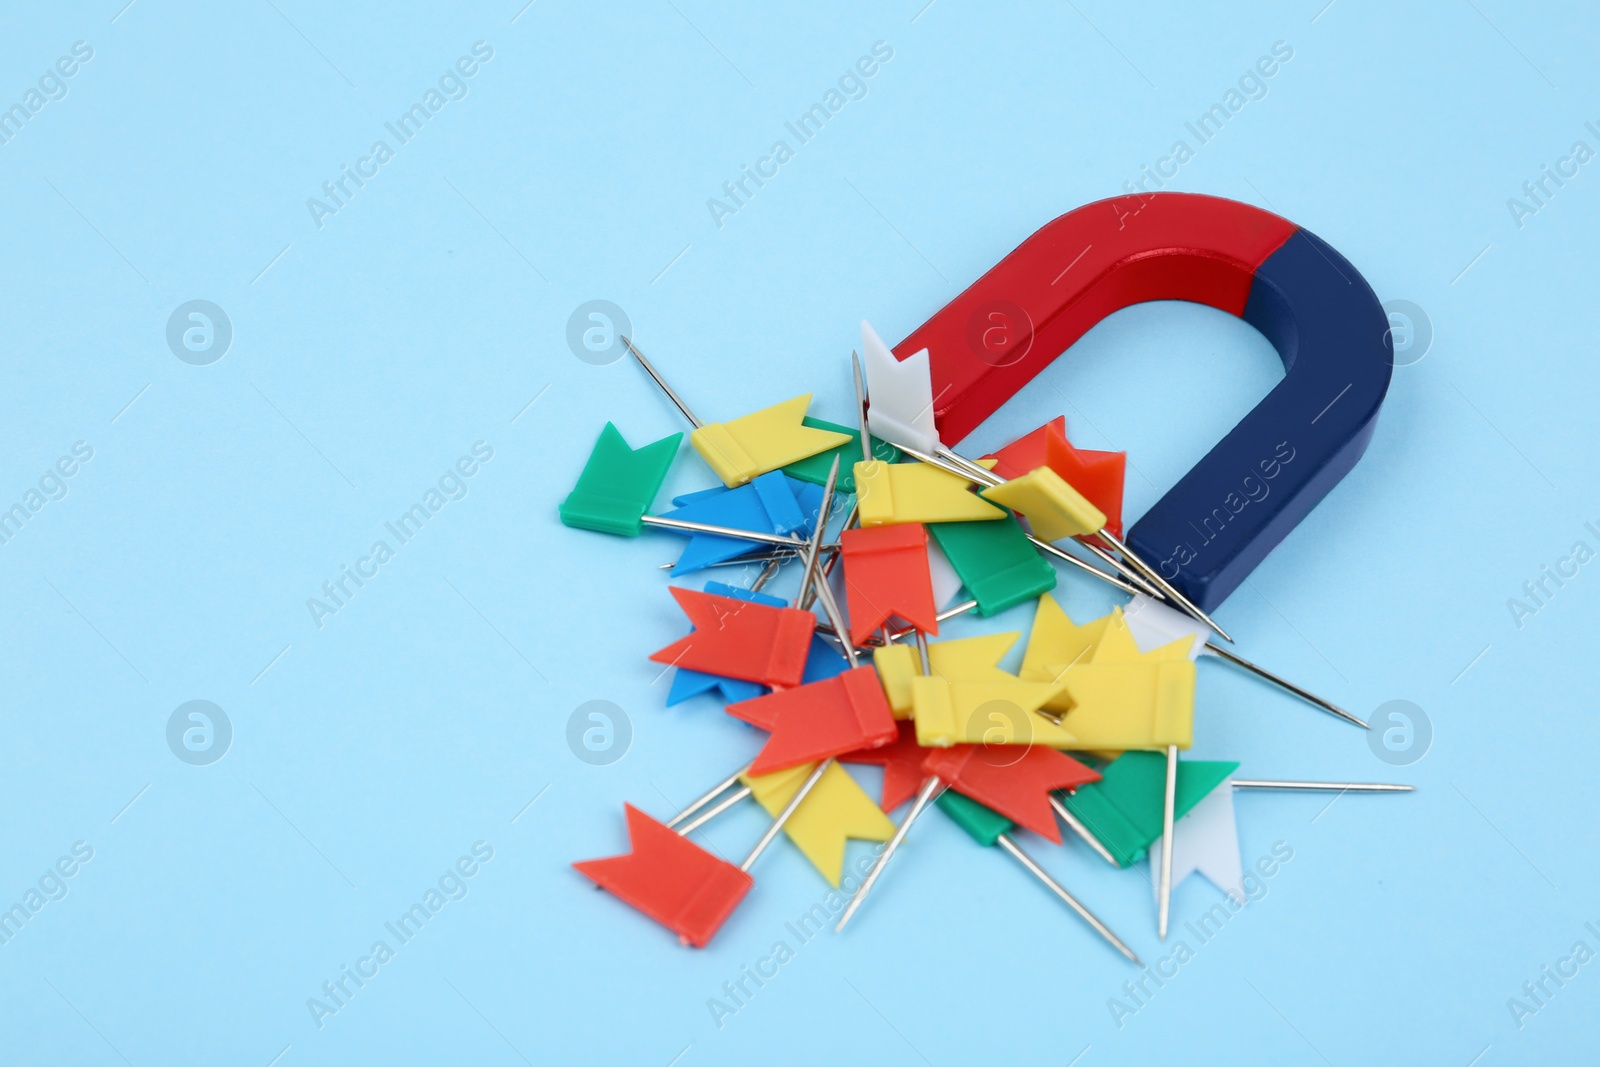 Photo of Magnet attracting colorful pins on light blue background